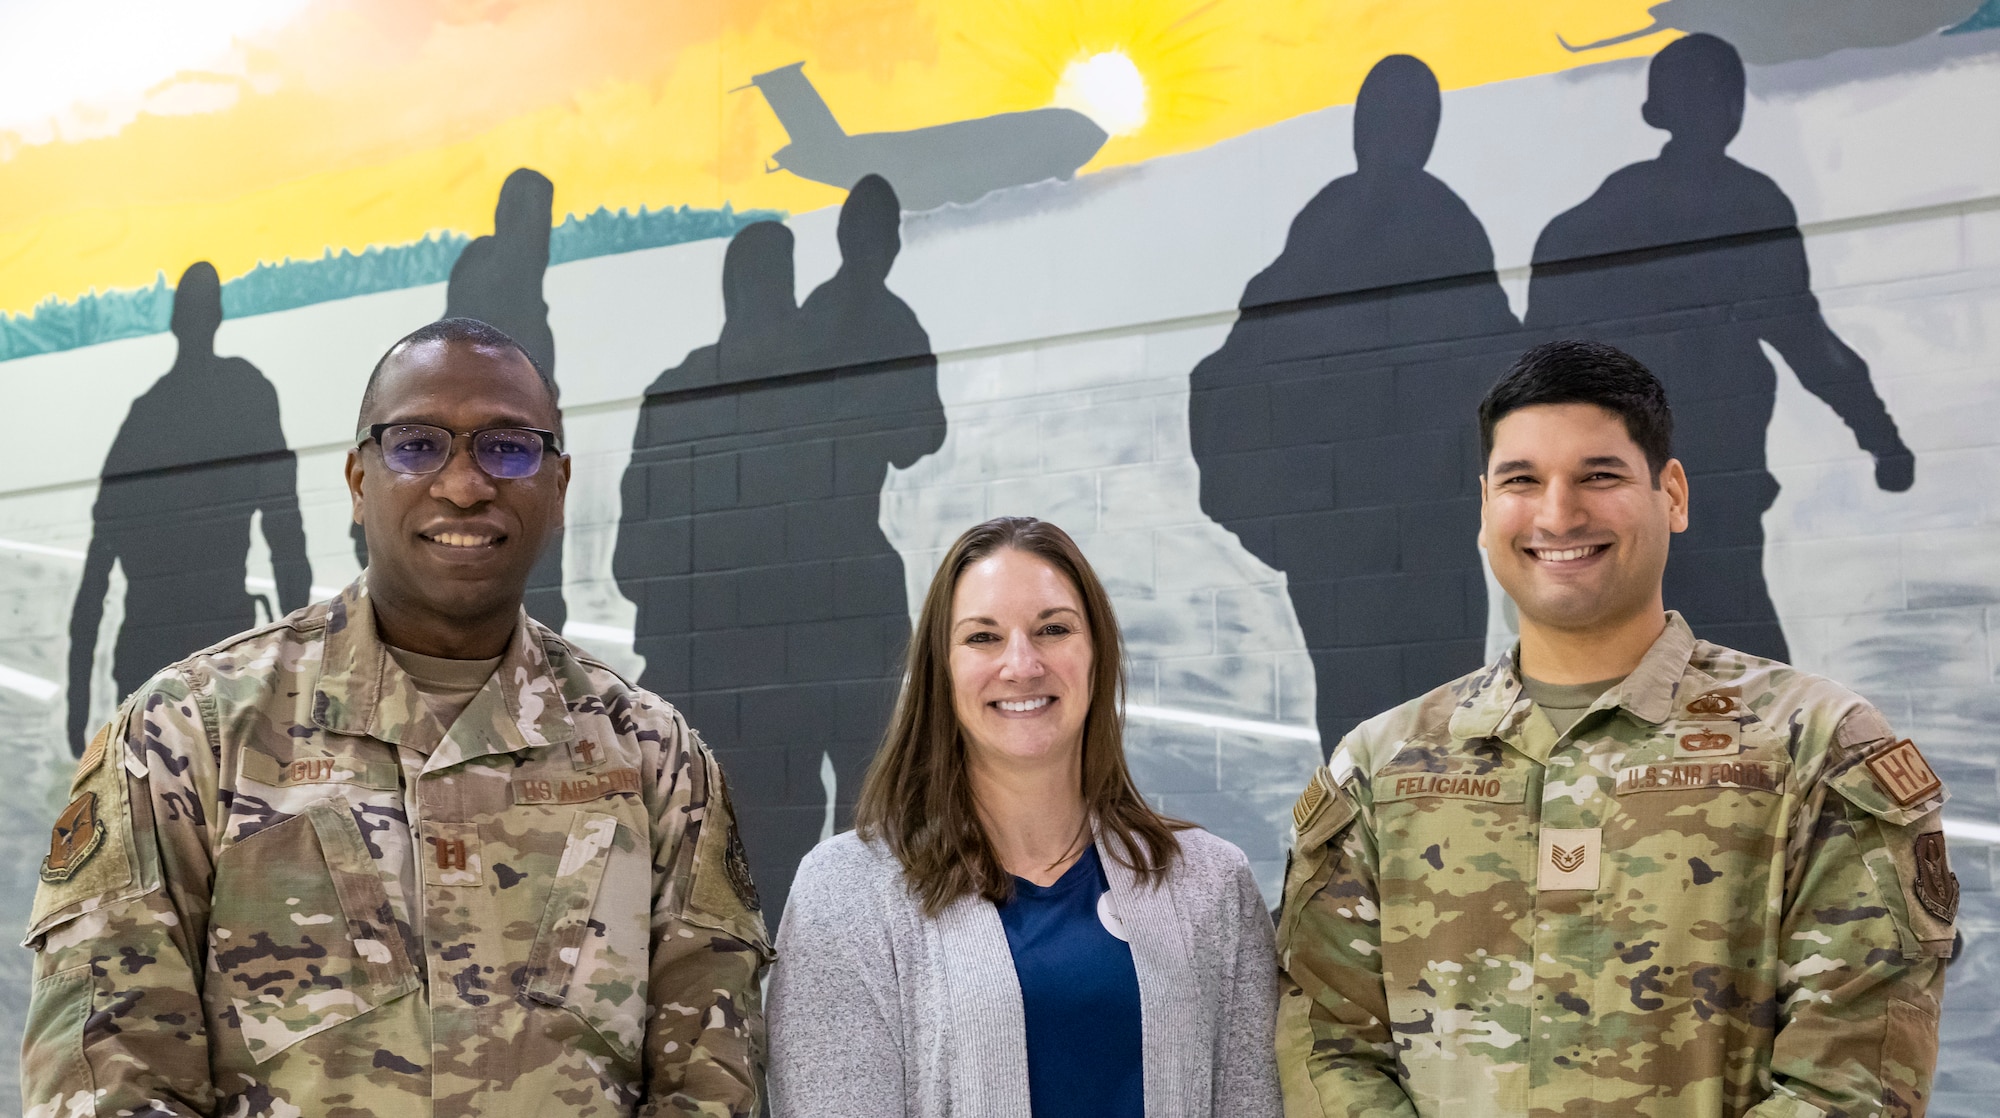 Chaplain (Capt.) William Guy, left, 436th Airlift Wing chaplain, Breanna Pelleschi, center, 436th Operational Medical Readiness Squadron licensed clinical social worker, and Tech. Sgt. Eric Feliciano, 512th AW chapel operations noncommissioned officer in charge, pose for a photo at Dover Air Force Base, Delaware, Nov. 21, 2022. Guy, Pelleschi and Feliciano make up the True North program team that will be embedding into the 436th Mission Generation Group. True North is a mental and spiritual health support program that provides tools and resources to help increase resiliency of Airmen within a unit. (U.S. Air Force photo by Senior Airman Stephani Barge)